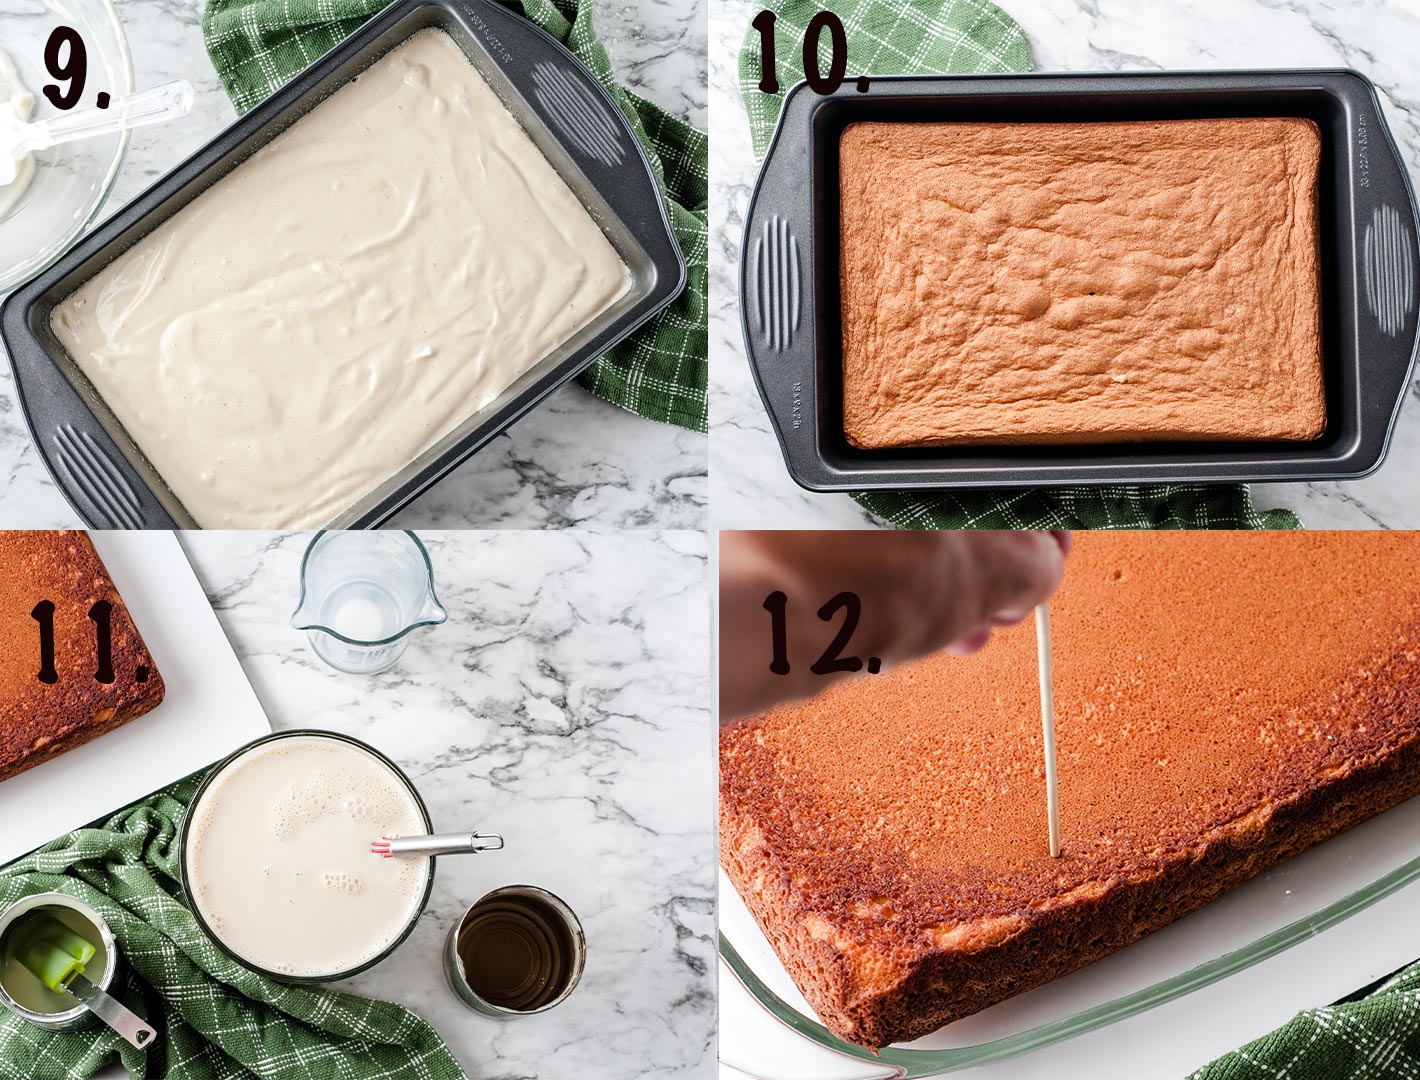 cake batter in a baking pan and a baked cake in a collage of 4 photos